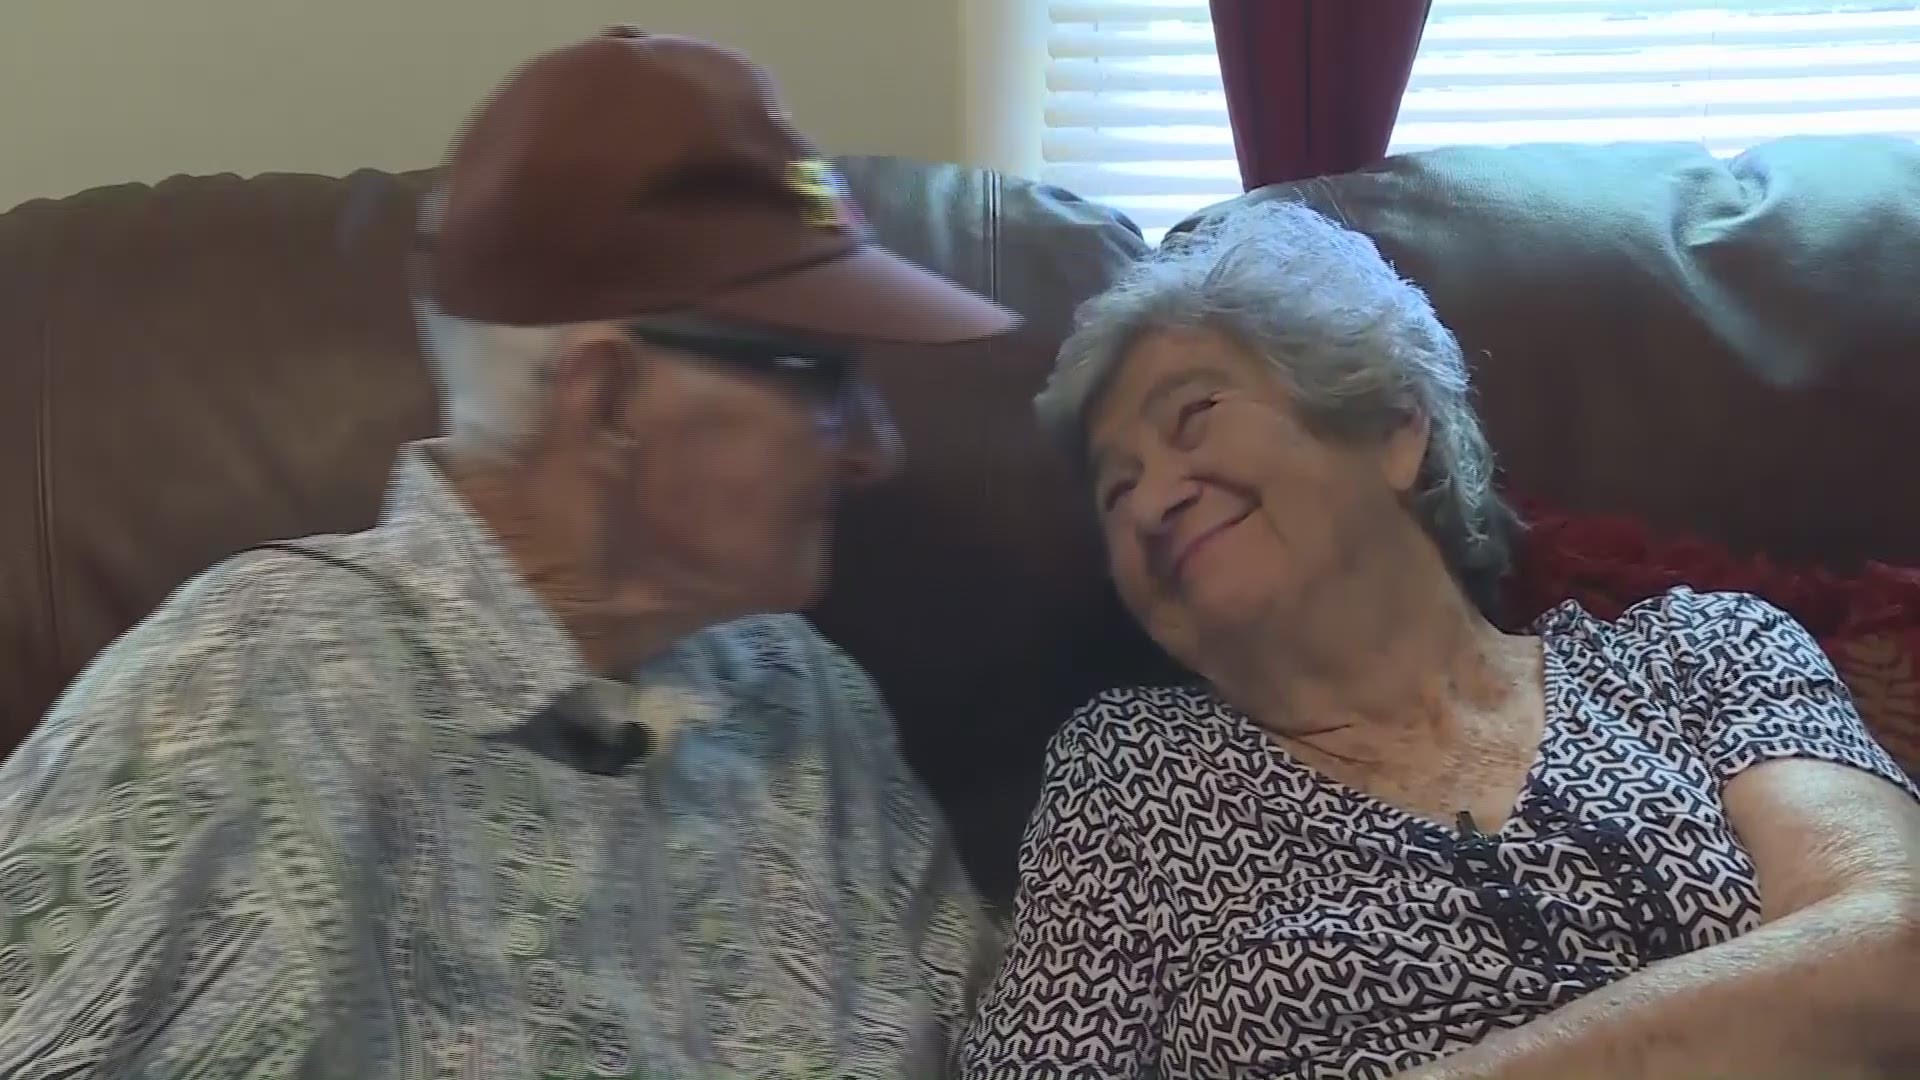 A love story that started 71 years ago came to an end as the man and his wife died on the same day.